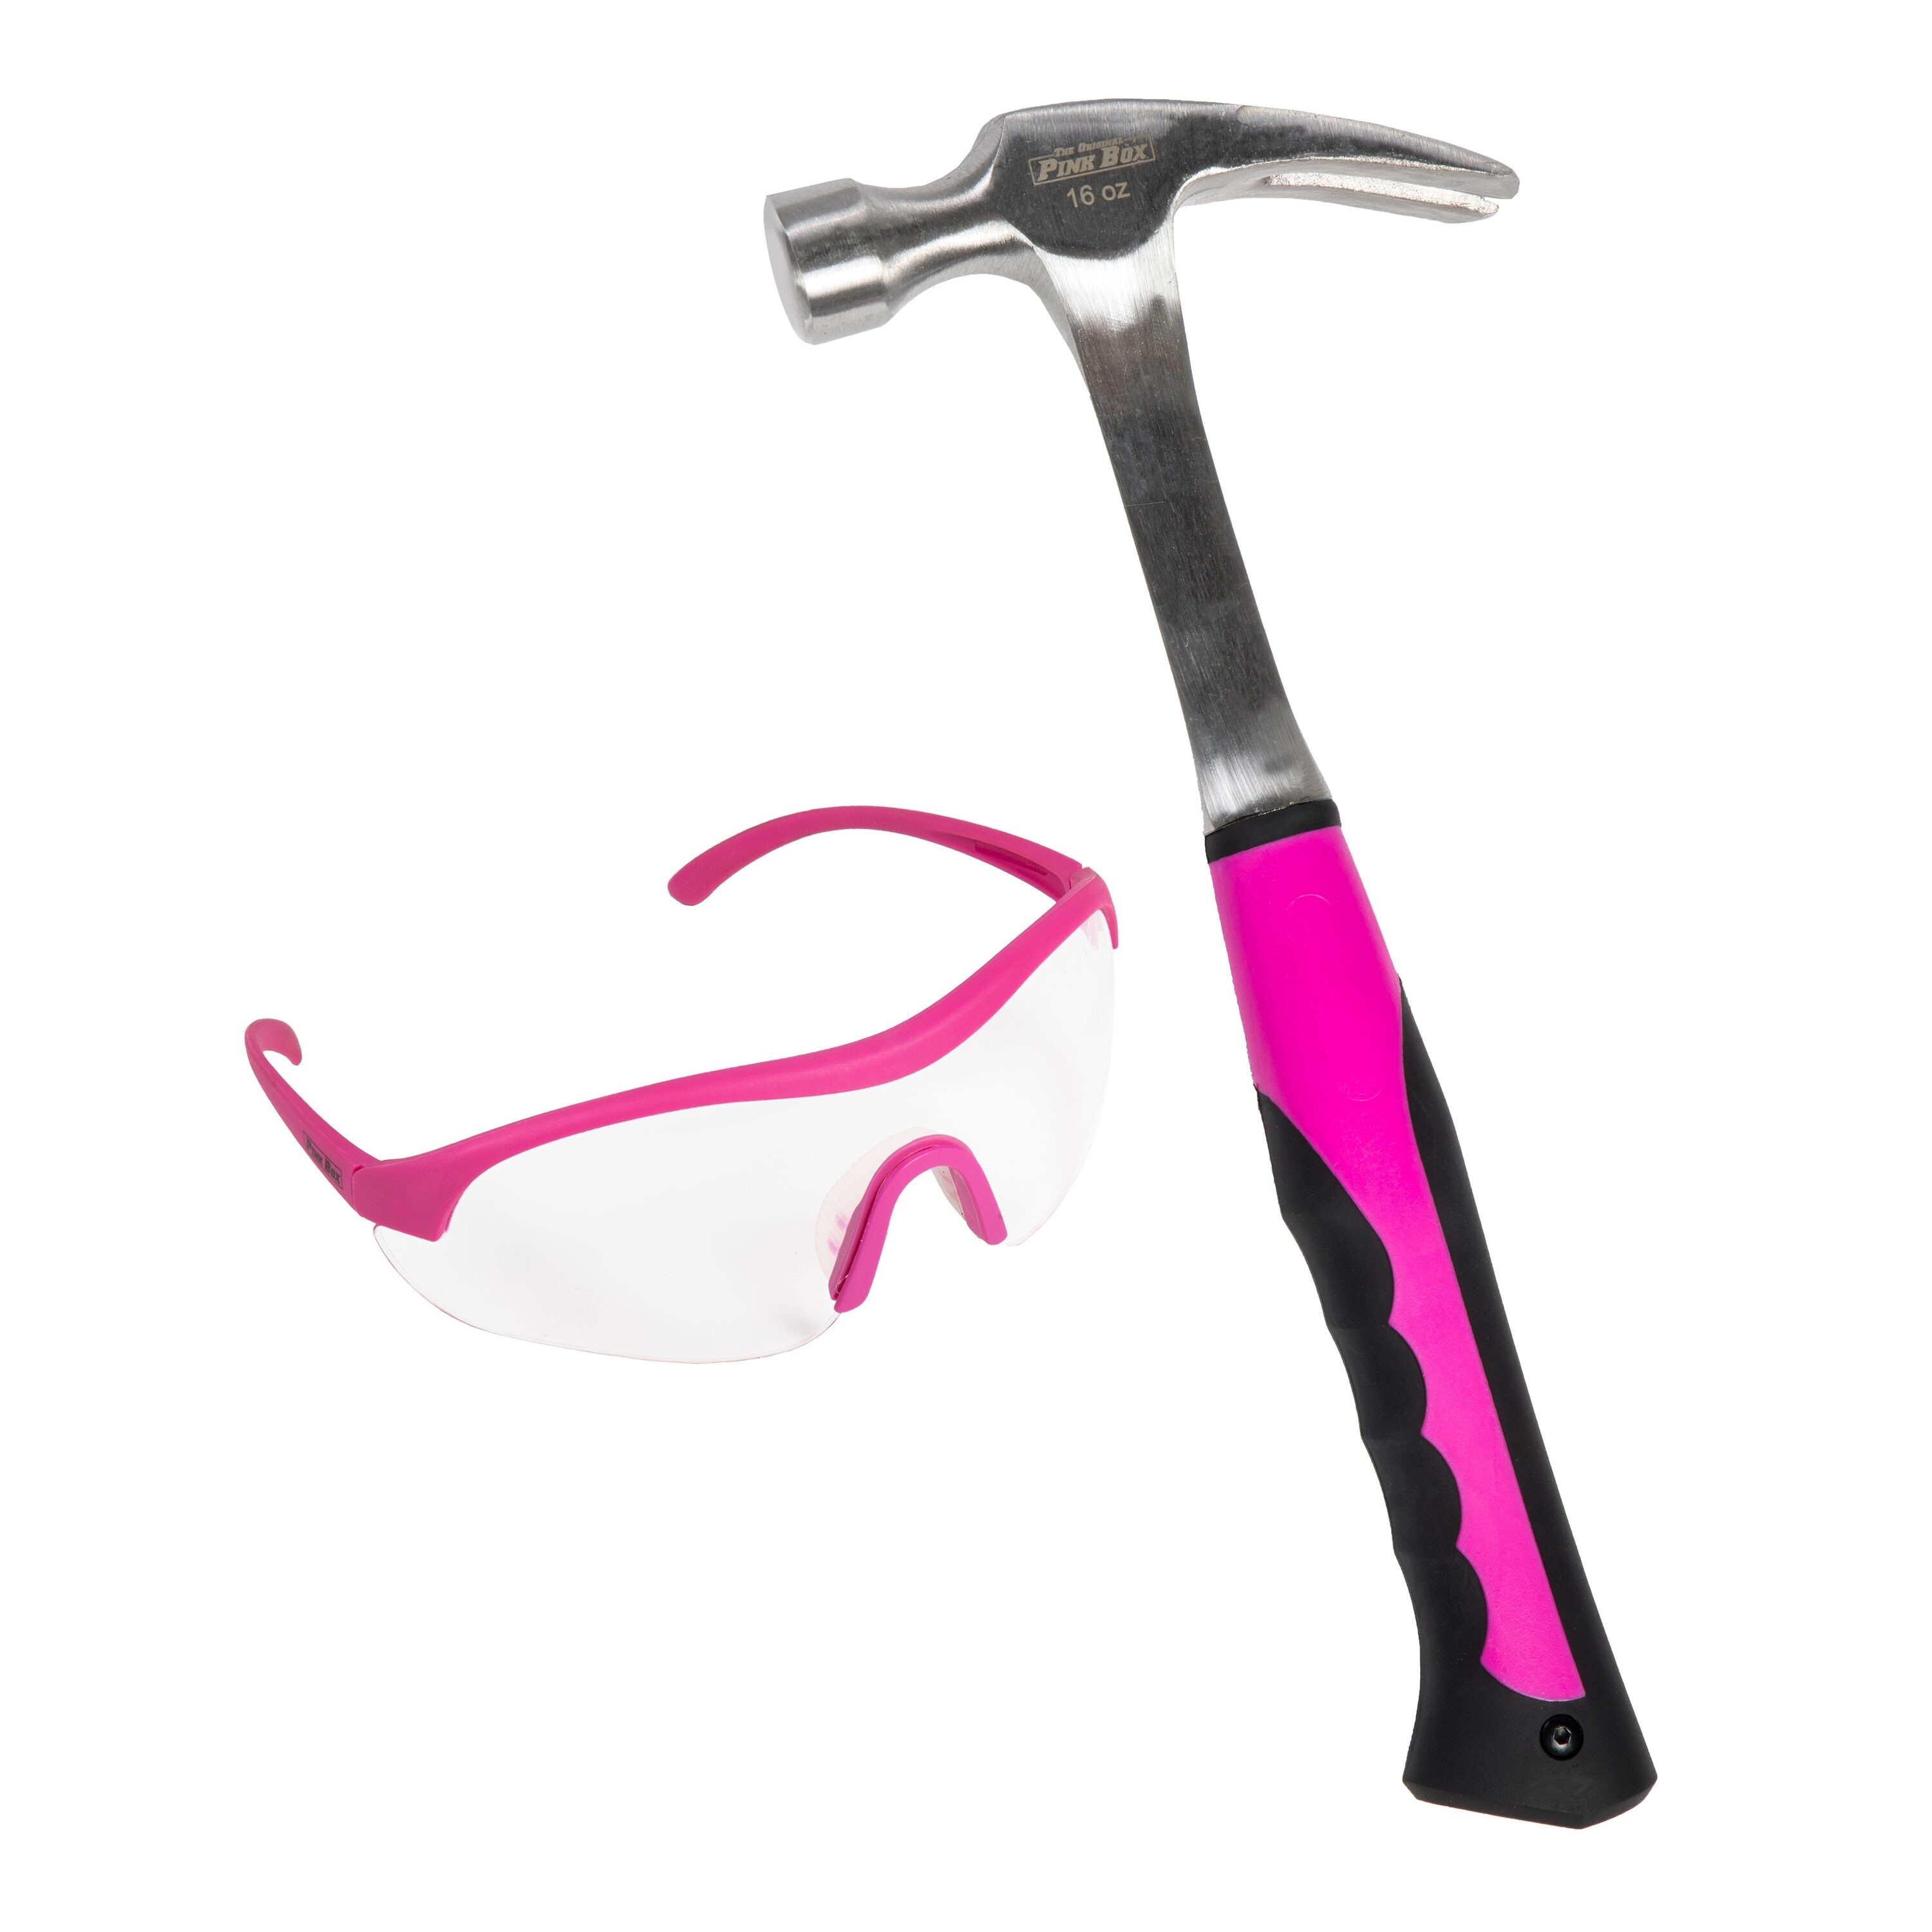 The Original Pink Box 16-oz Smooth Face Steel Head Rip Claw Hammer